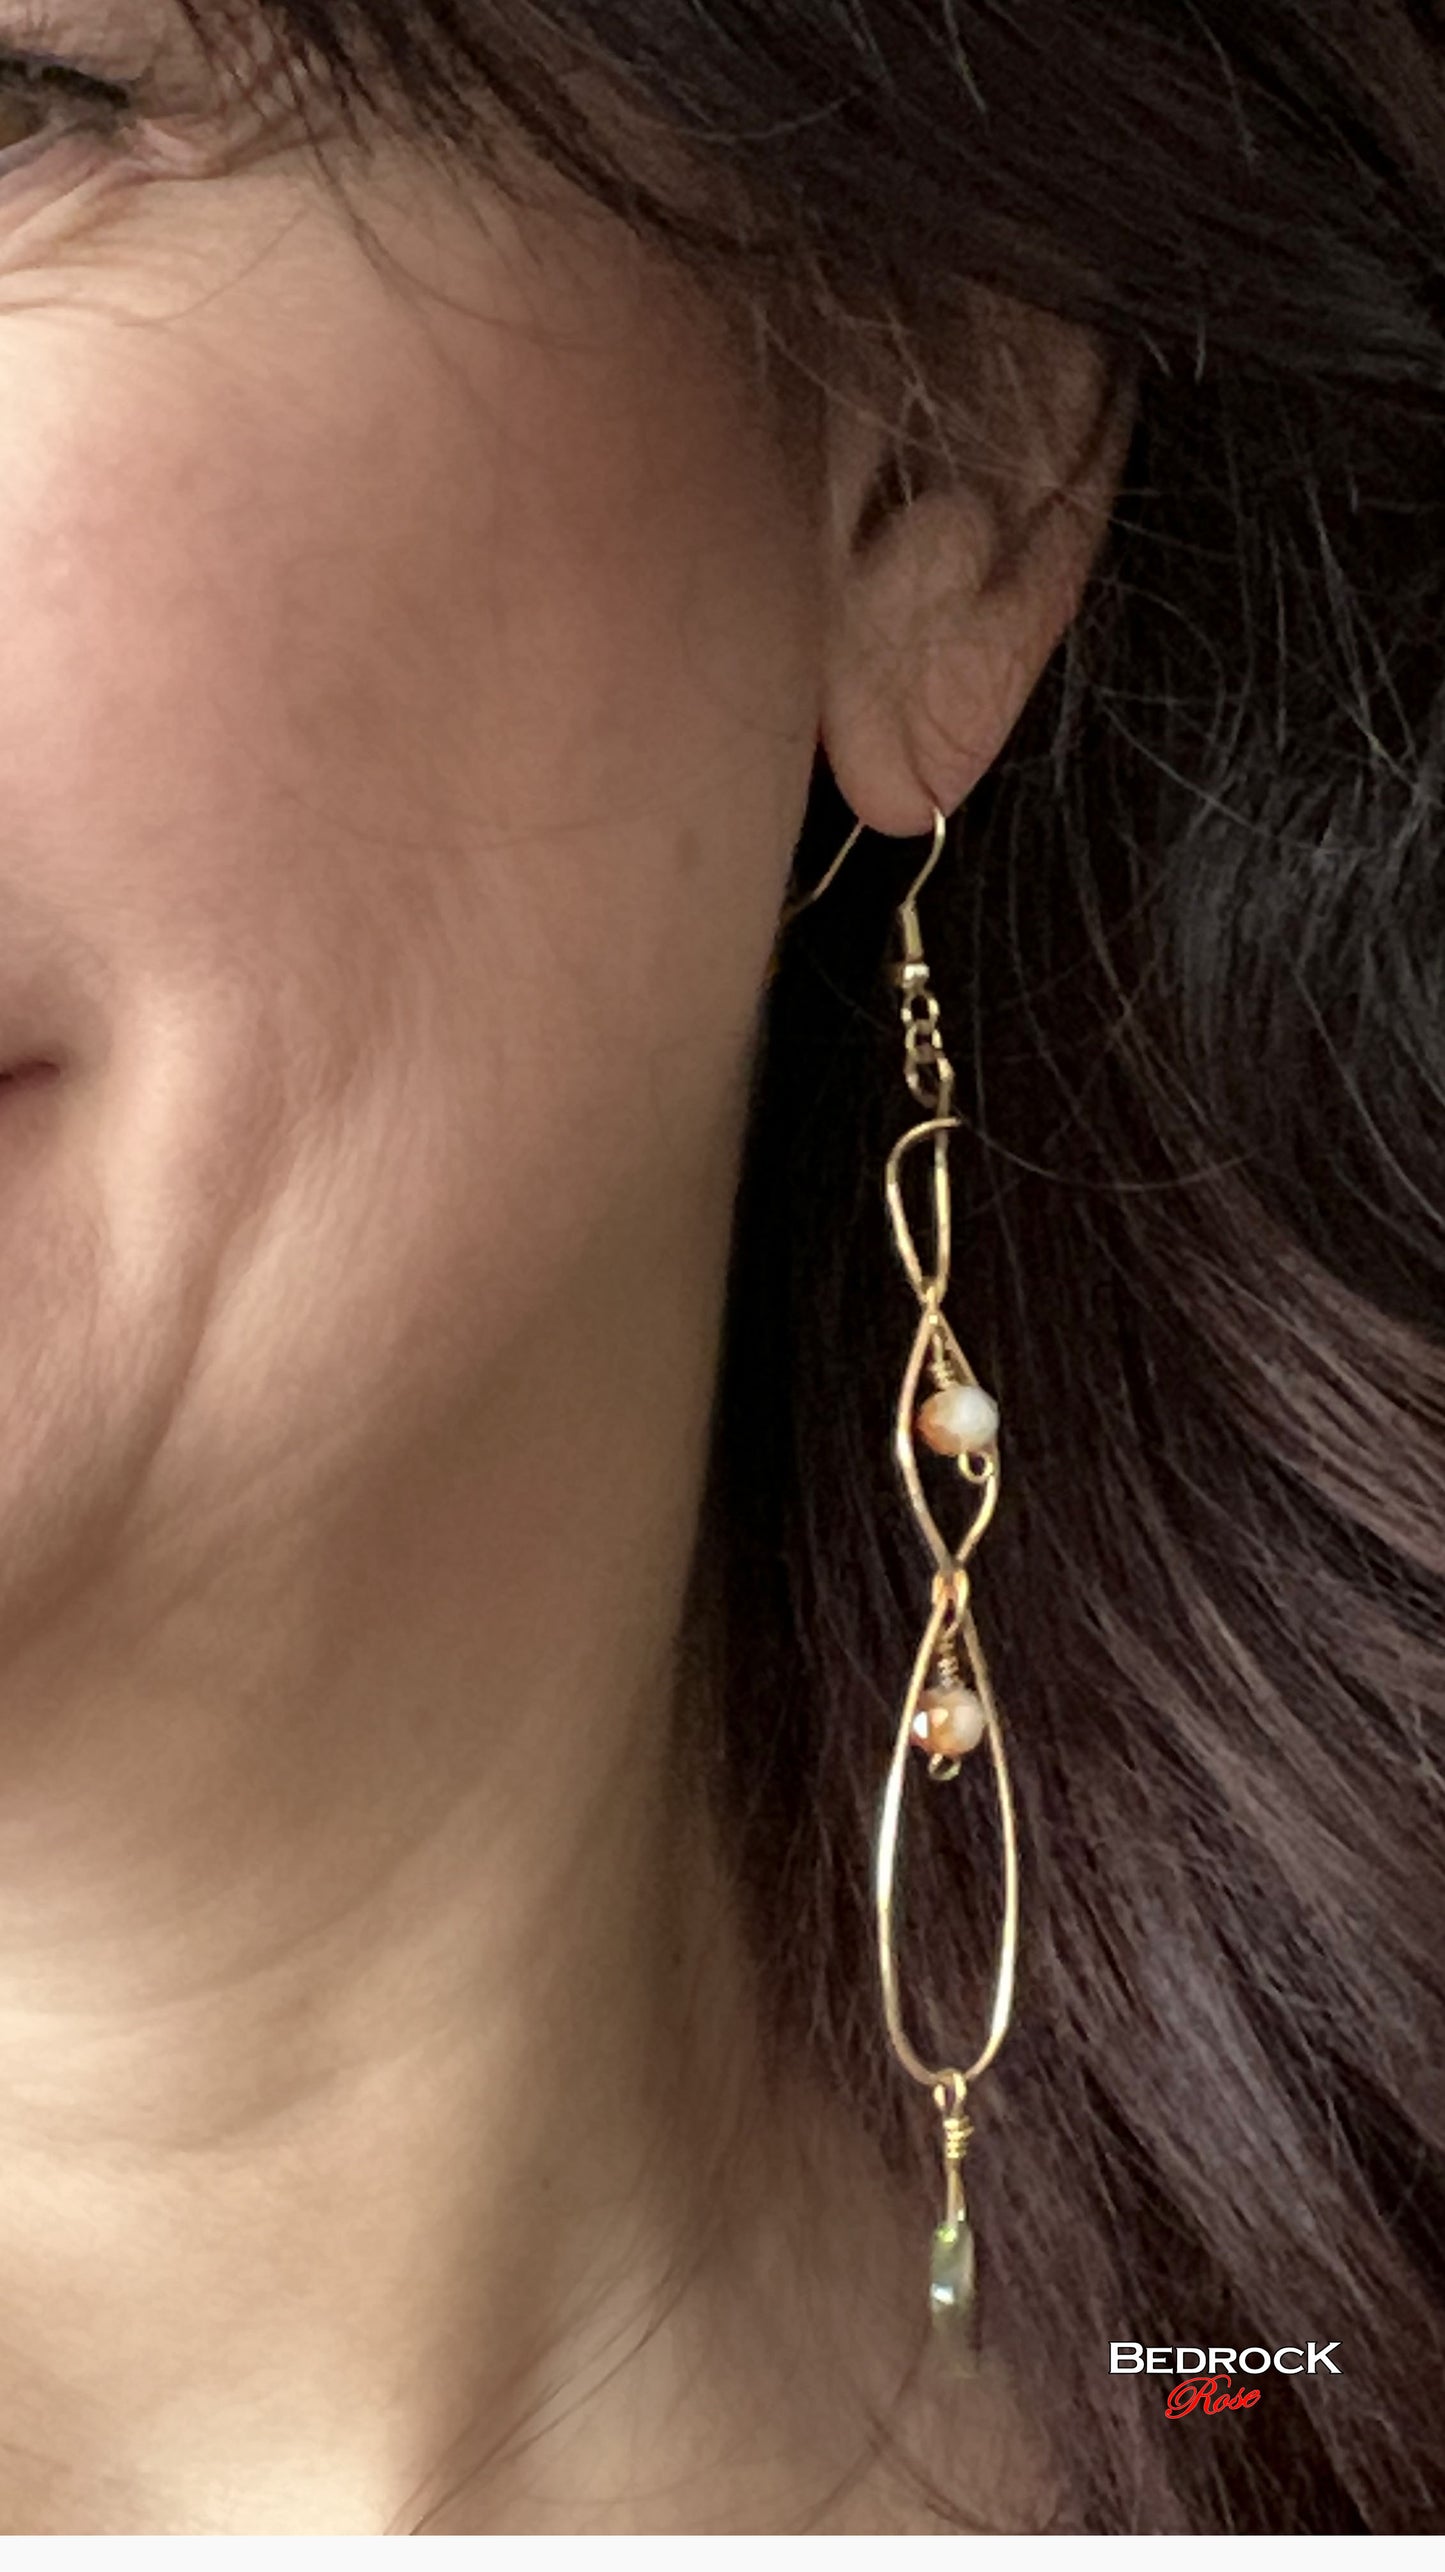 Time for a Night Out Dangling Earrings!